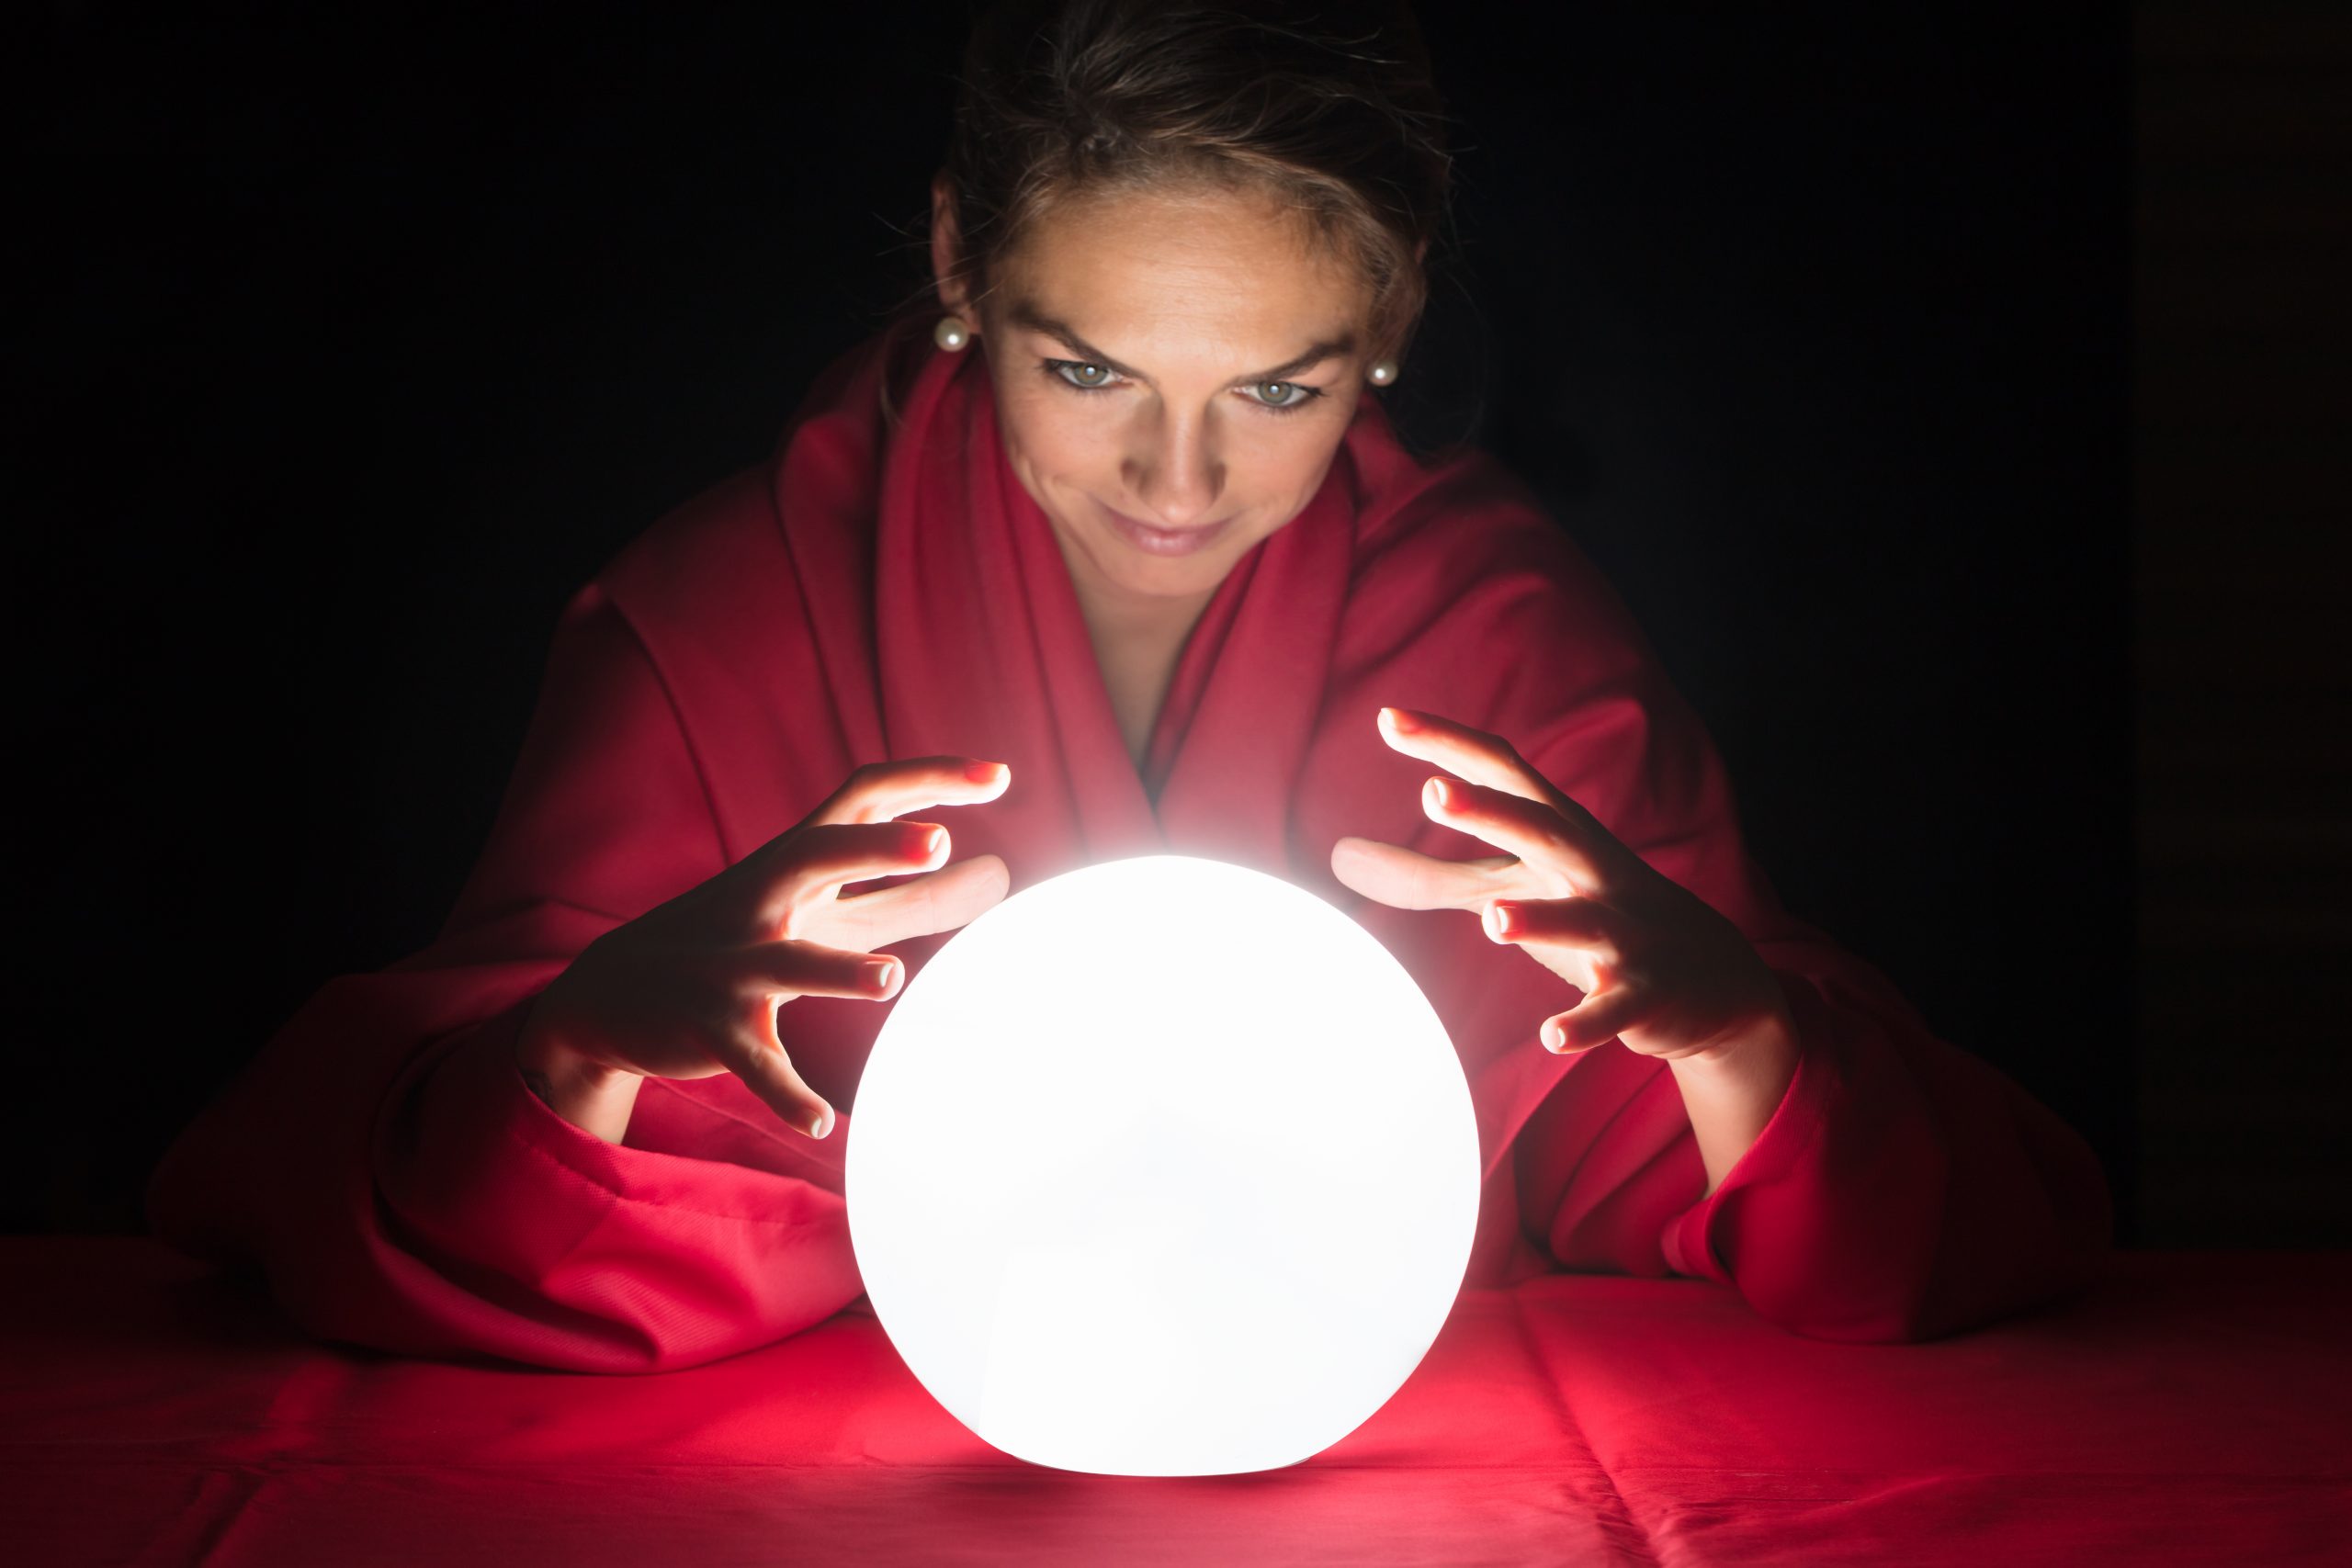 stock photo of a fortune teller with a crystal ball